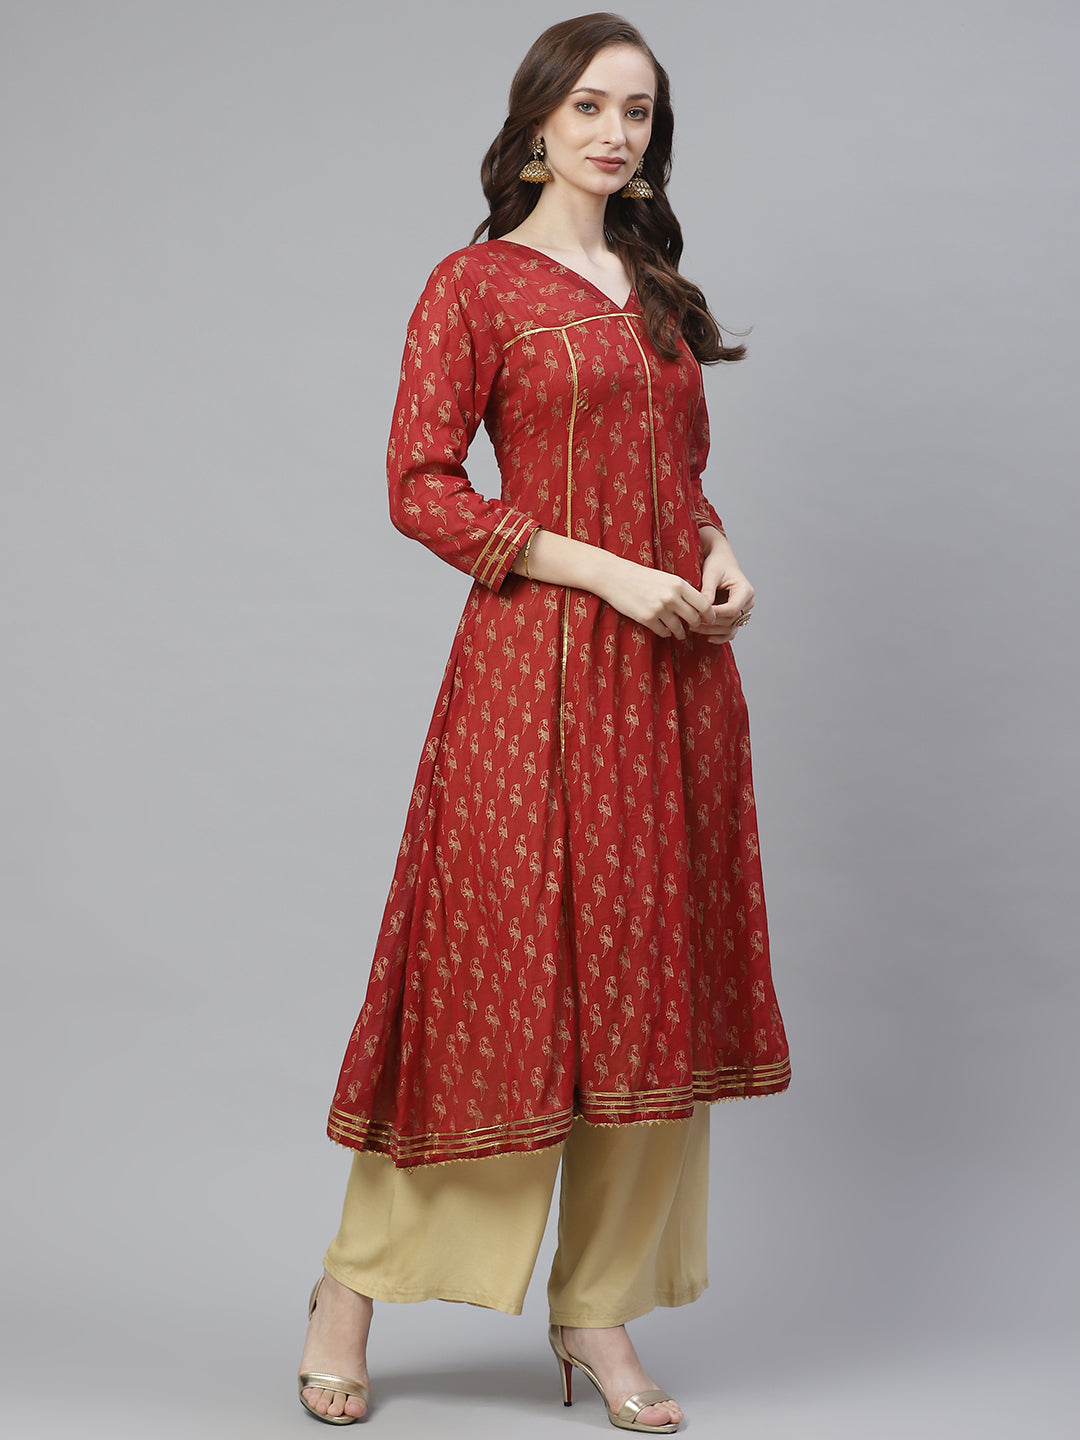 Women's Maroon And Golden Quirky Block Printed A-Line Kurta - Bhama Couture